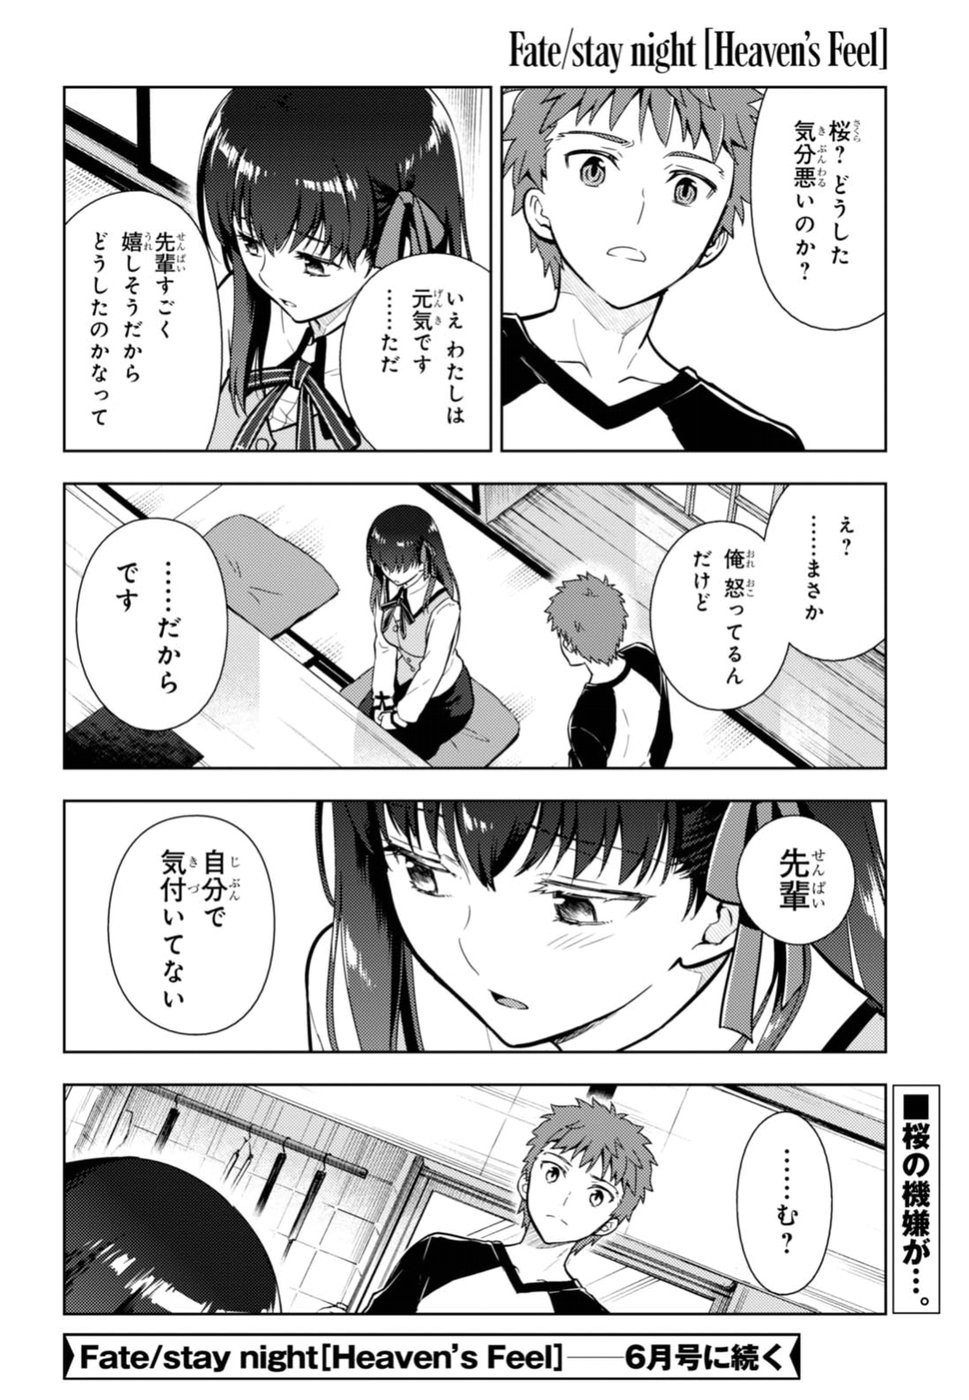 Fate/Stay night Heaven's Feel - Chapter 36 - Page 39